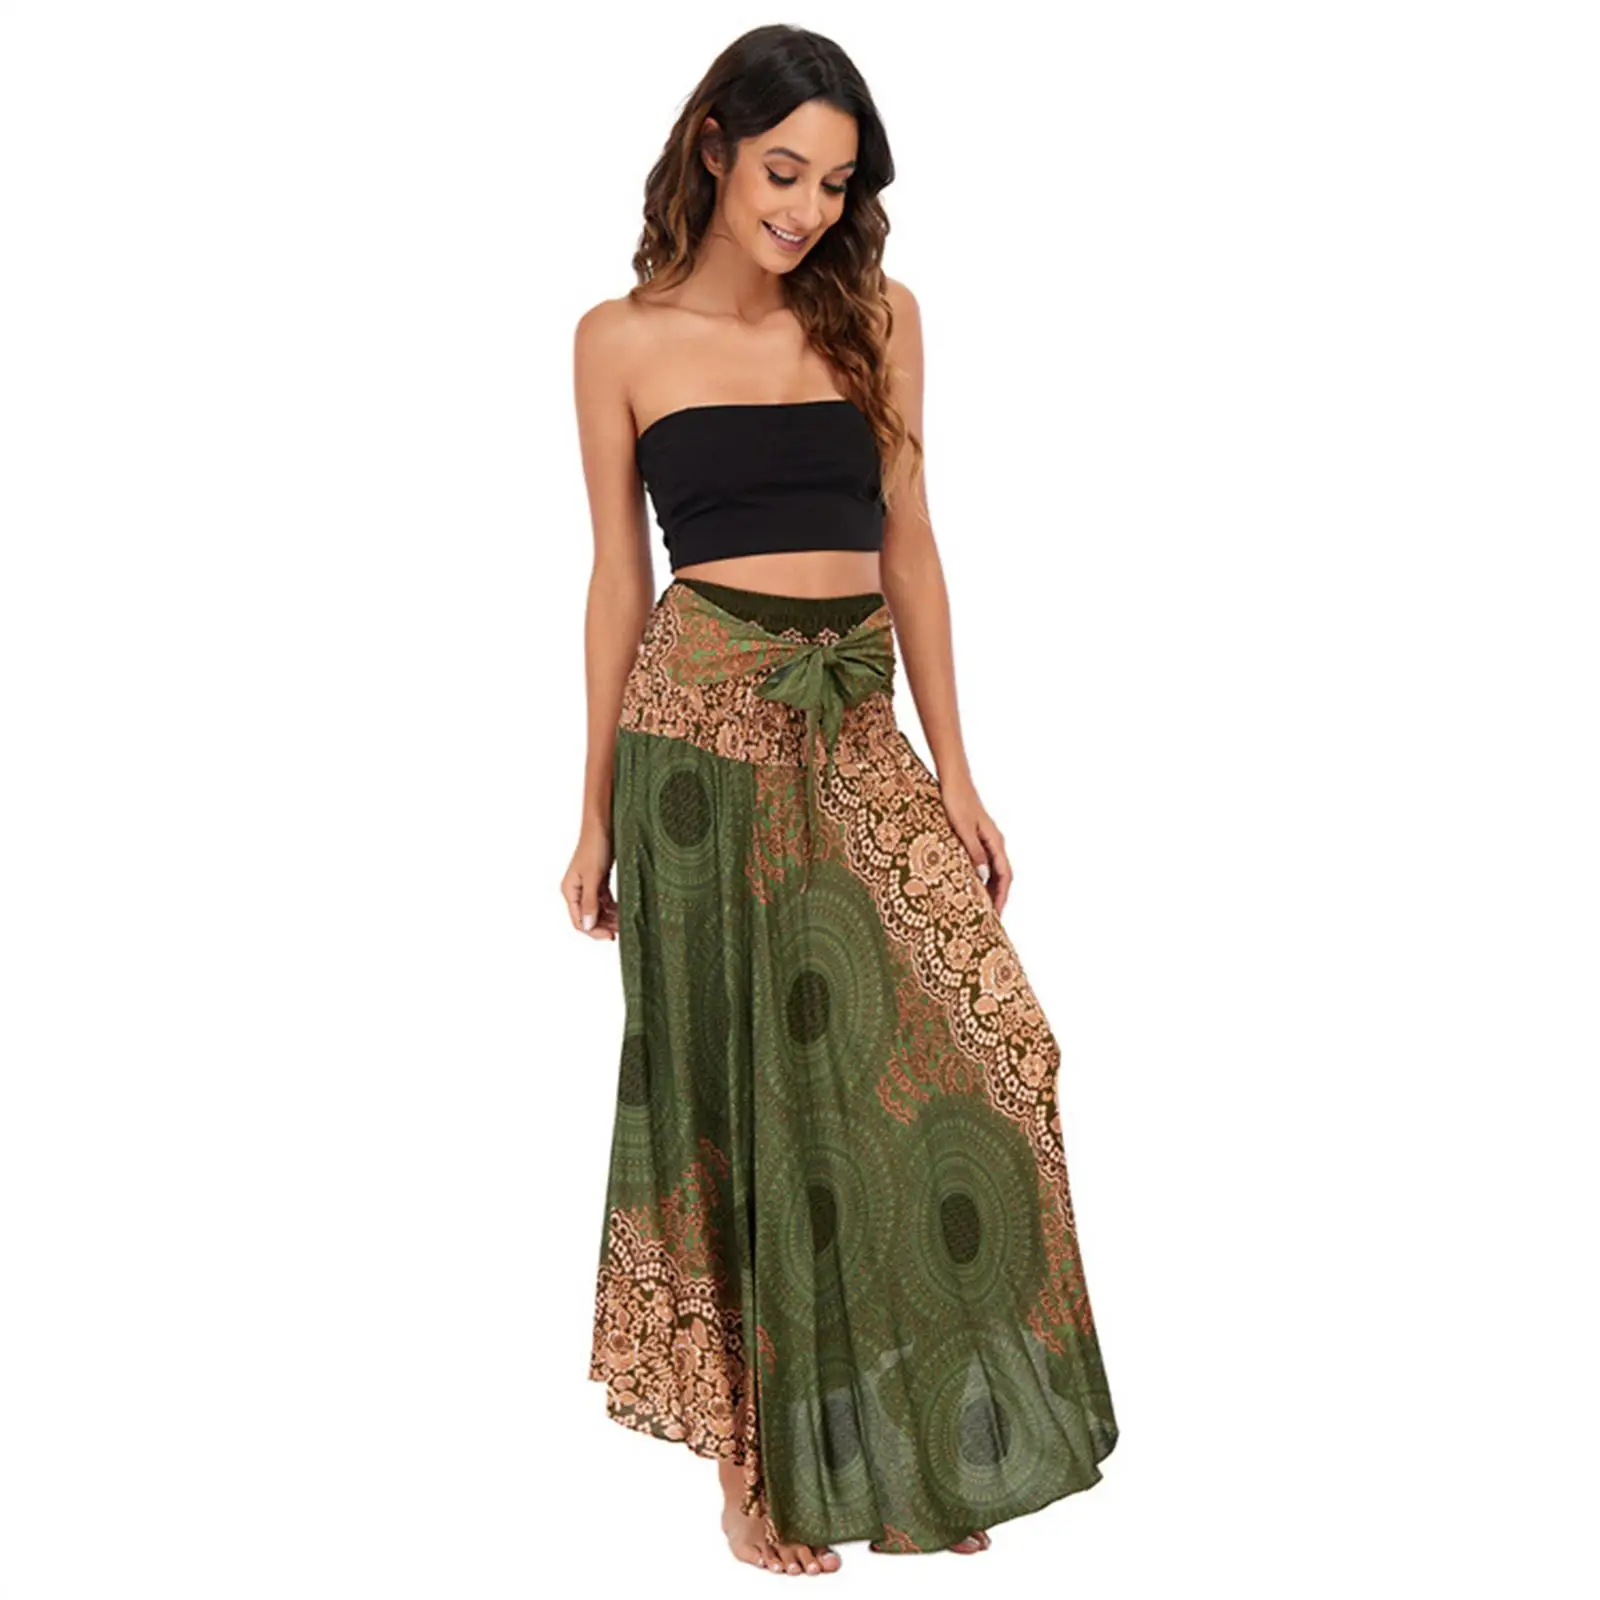 Cotton  Maxi Skirt Hippie Style Bohemian High Waisted Printed Dancing Costume Wrap  for Women Stage Performance Latin  Dance